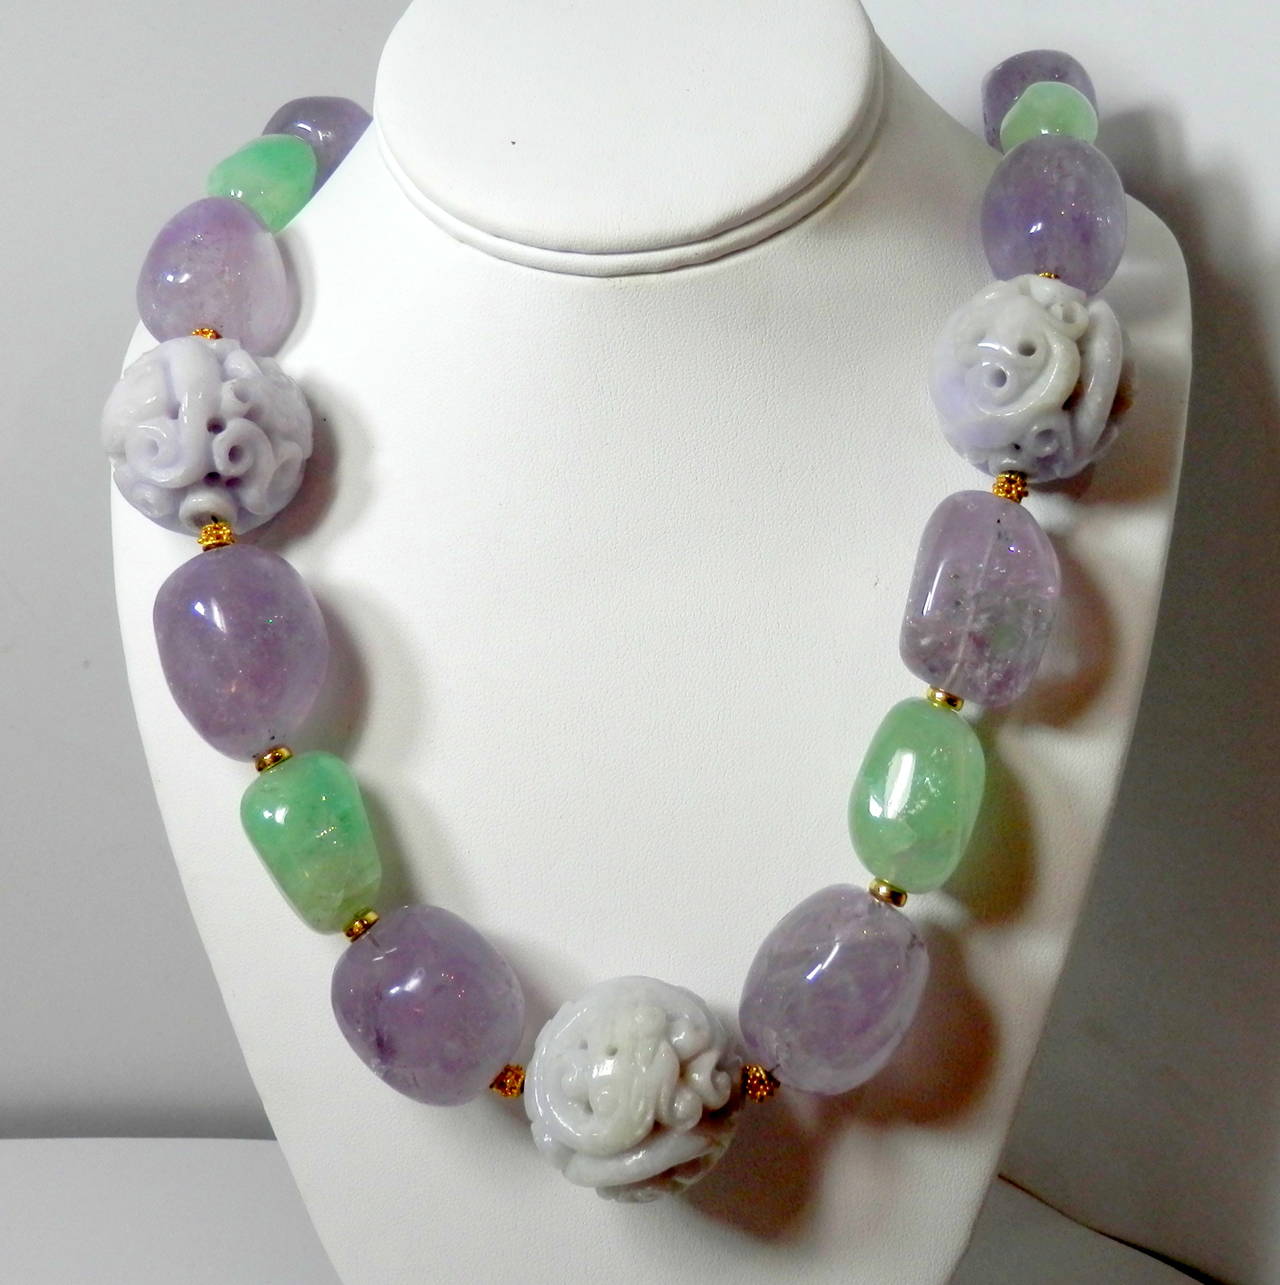 Several thousand carats of free form amethyst (medium to light lilac color, measuring approx. 20 to 23 mm.), emerald (light pastel green, measuring 18 to 22 mm approx.) and carved light lilac jade beads )measuring over 26 mm. in diameter.)